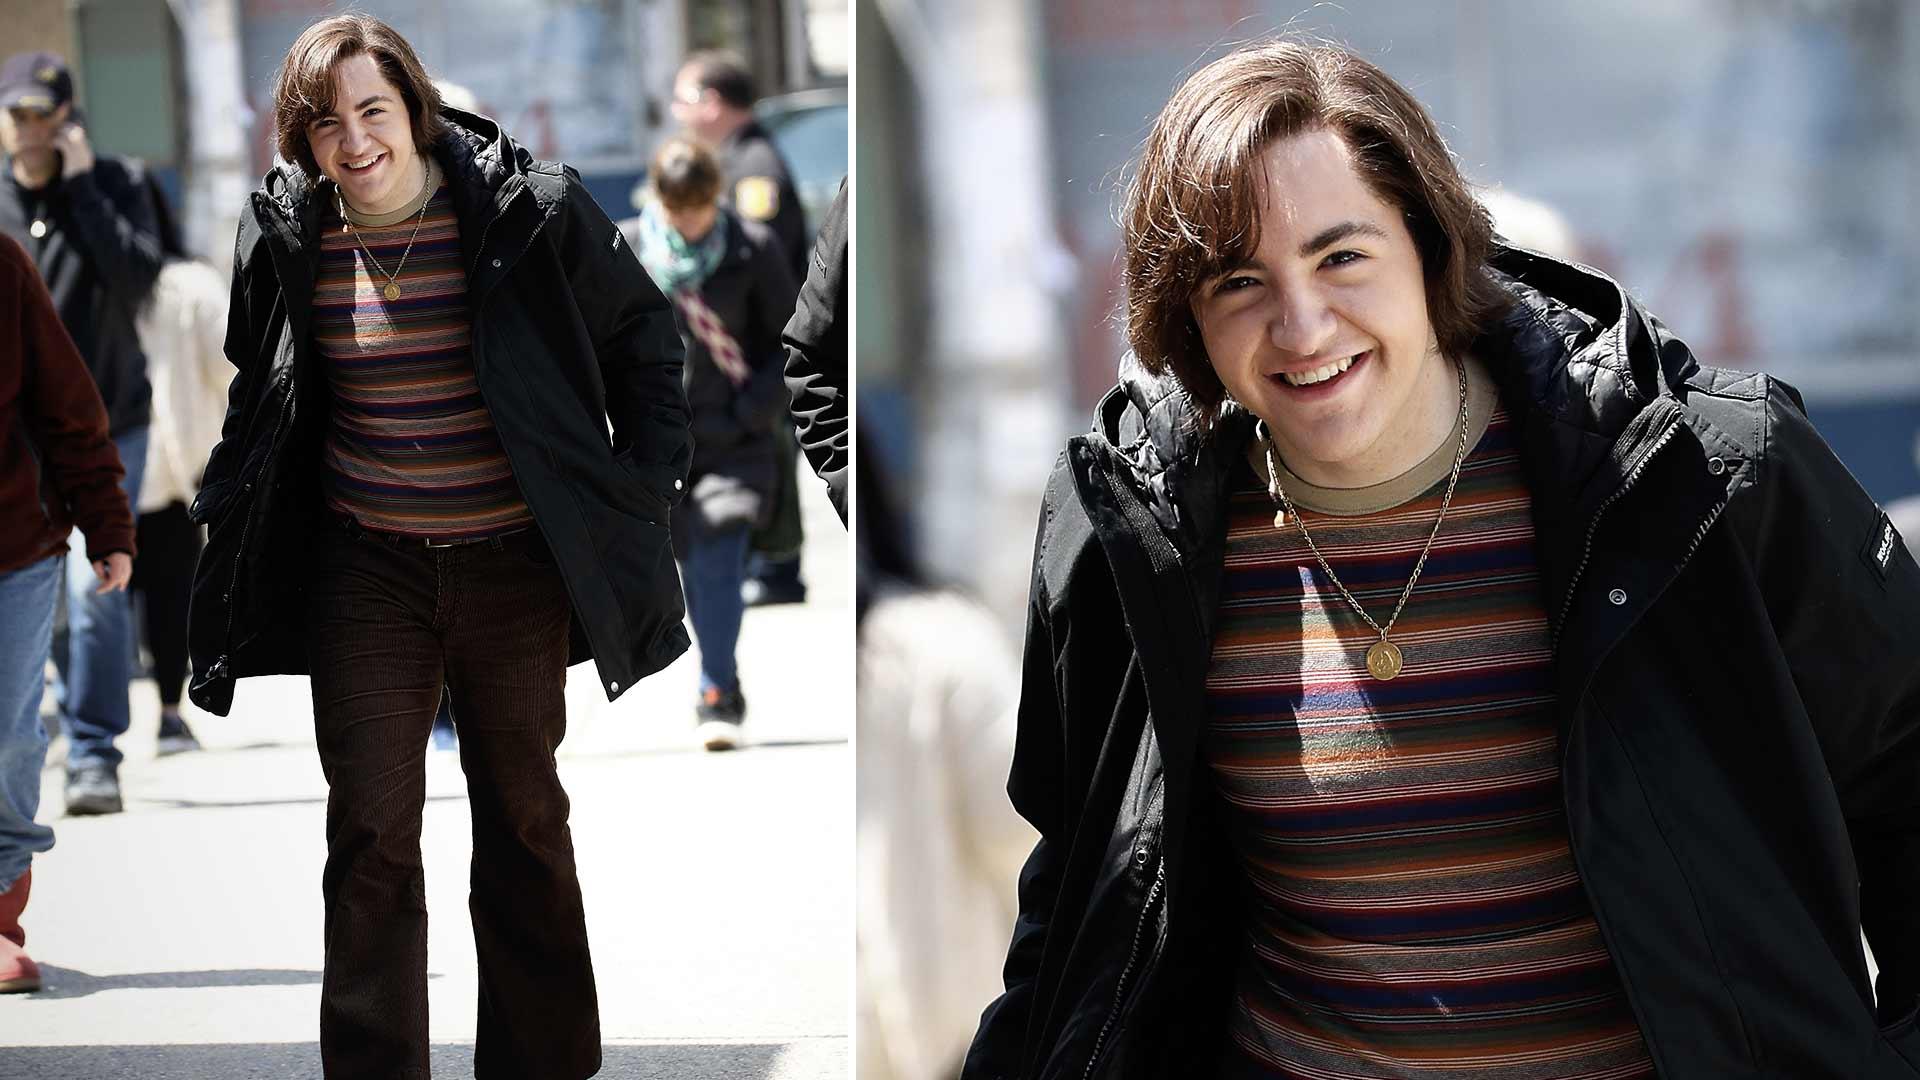 Michael Gandolfini Shows Off Long Hair and Bell-Bottoms as He Becomes Young Tony Soprano